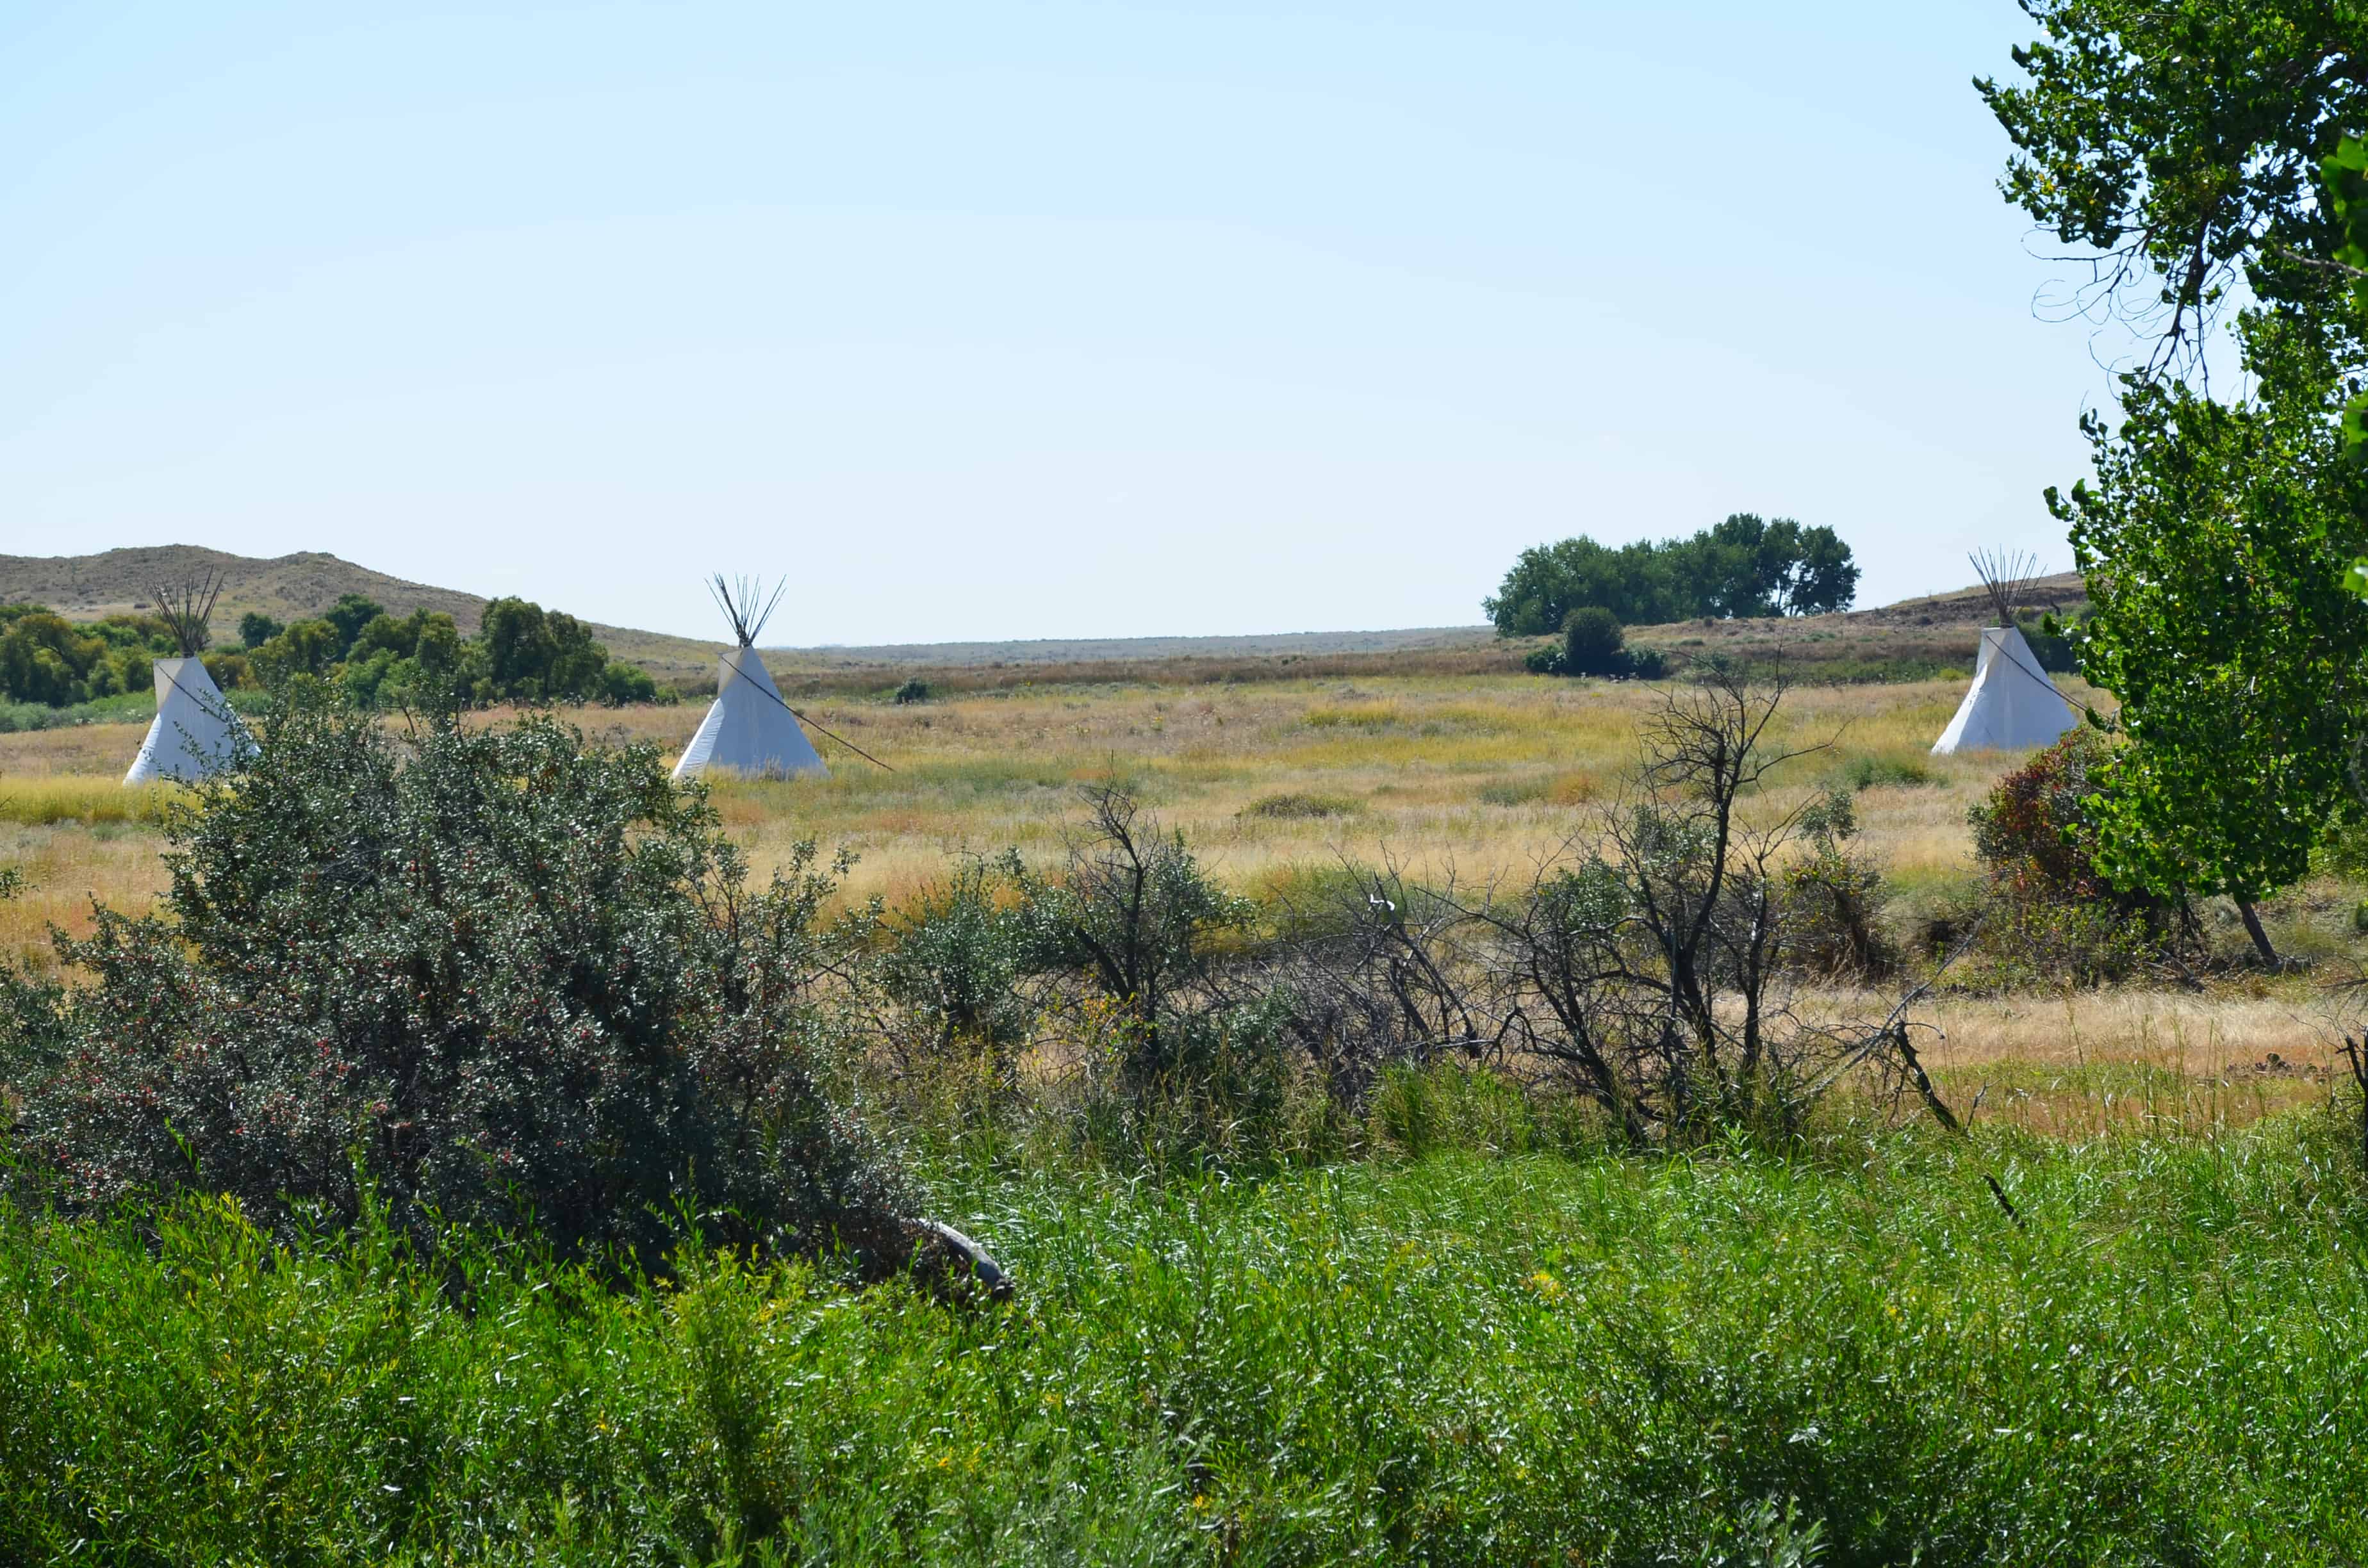 Tepees at Fort Laramie National Historic Site in Wyoming